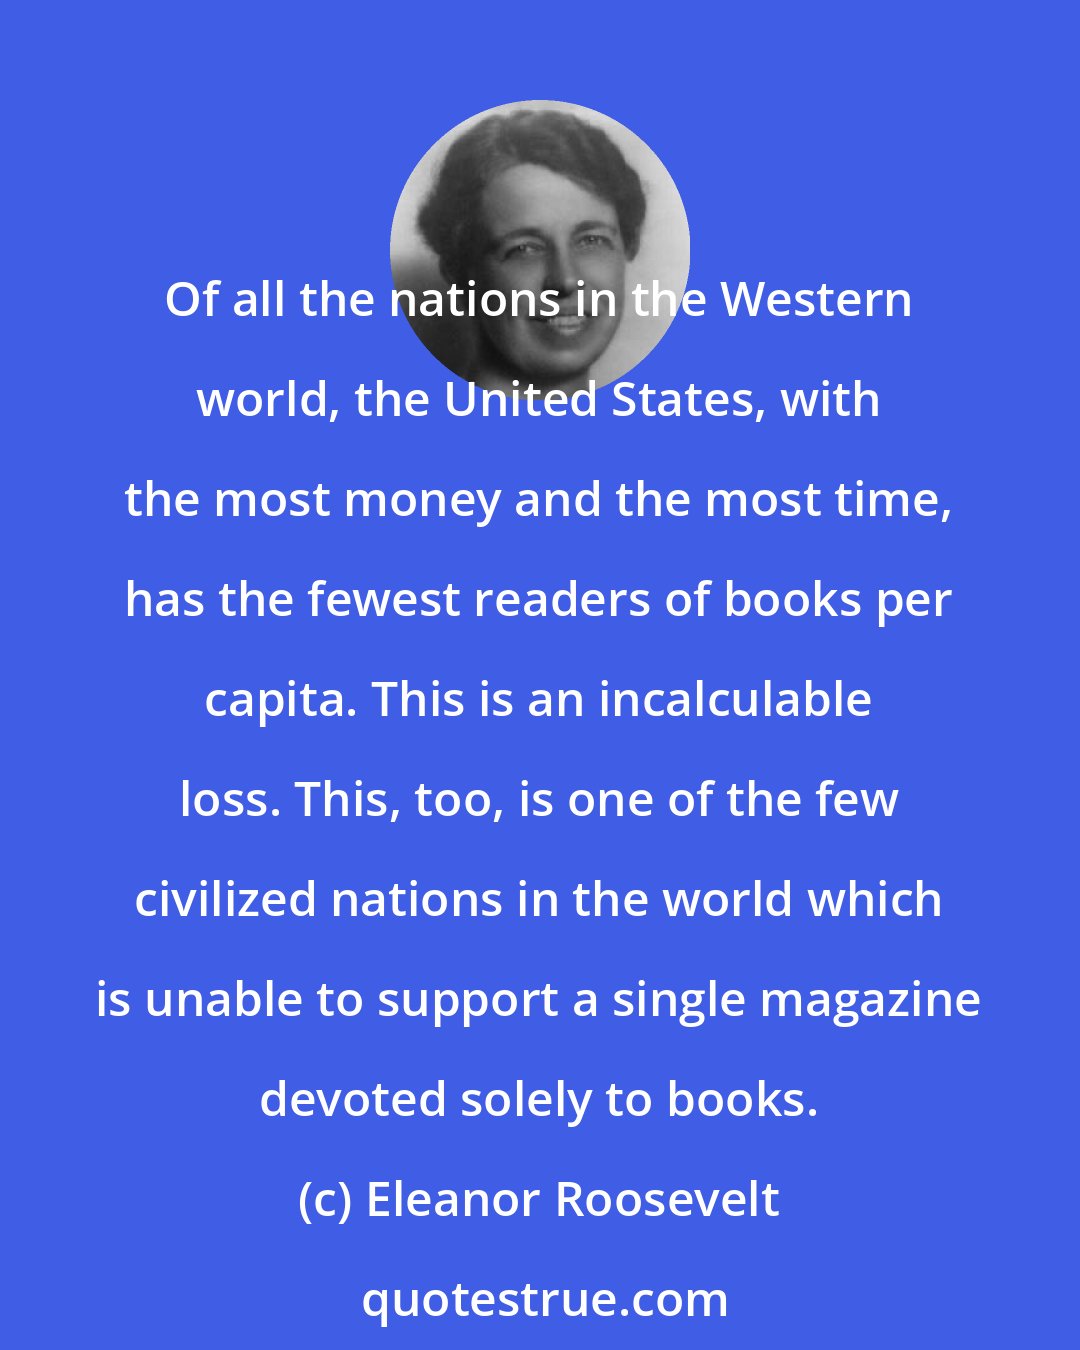 Eleanor Roosevelt: Of all the nations in the Western world, the United States, with the most money and the most time, has the fewest readers of books per capita. This is an incalculable loss. This, too, is one of the few civilized nations in the world which is unable to support a single magazine devoted solely to books.